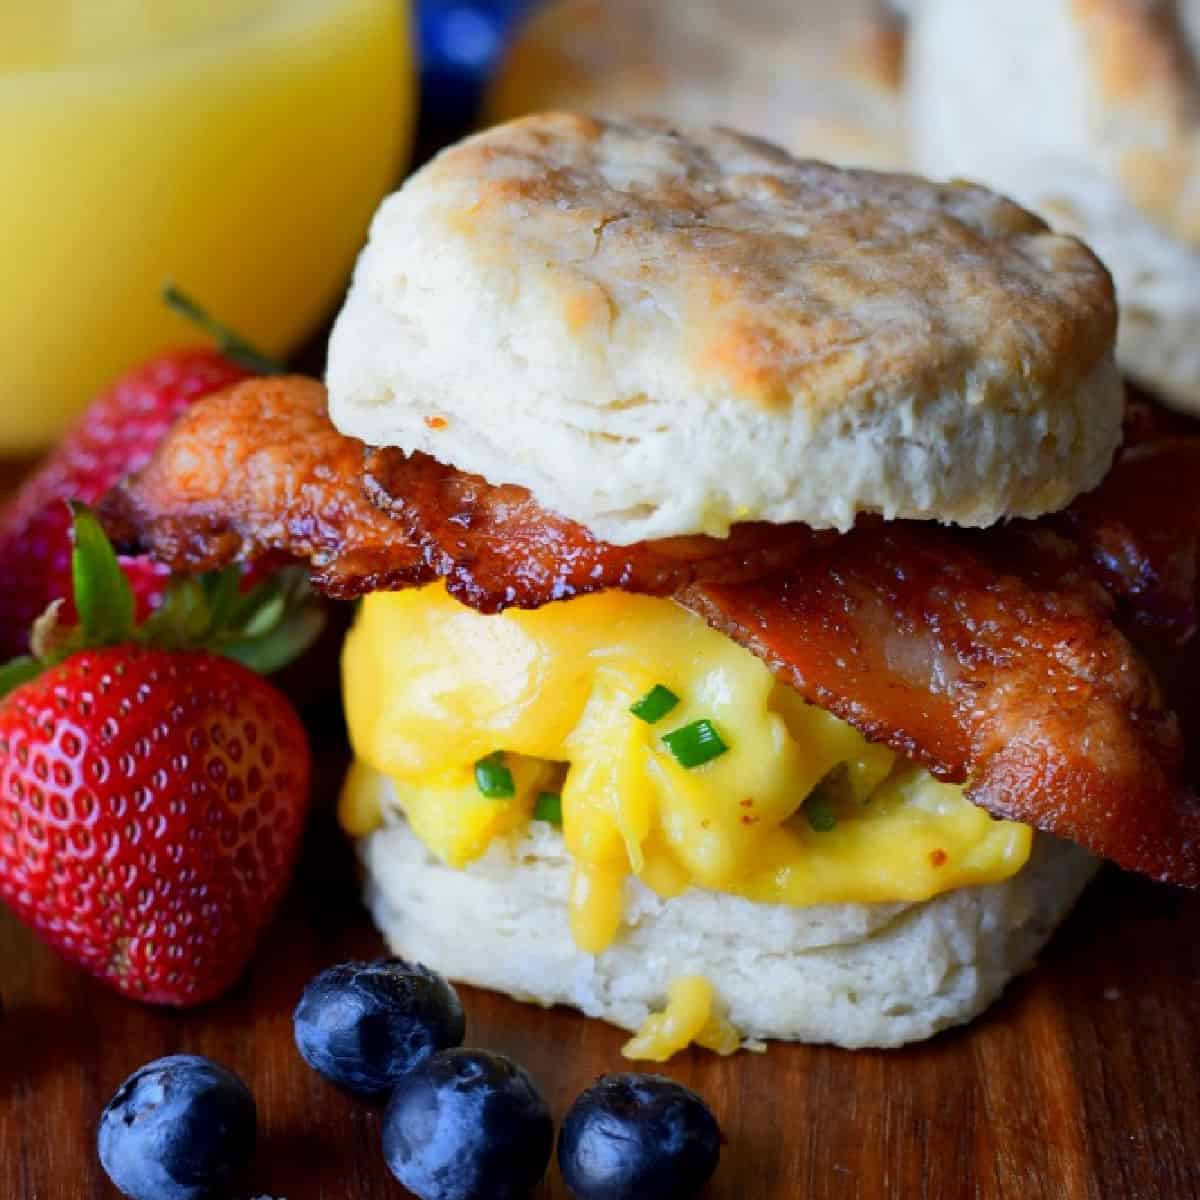 Whip up fast food-style breakfast sandwiches at home.